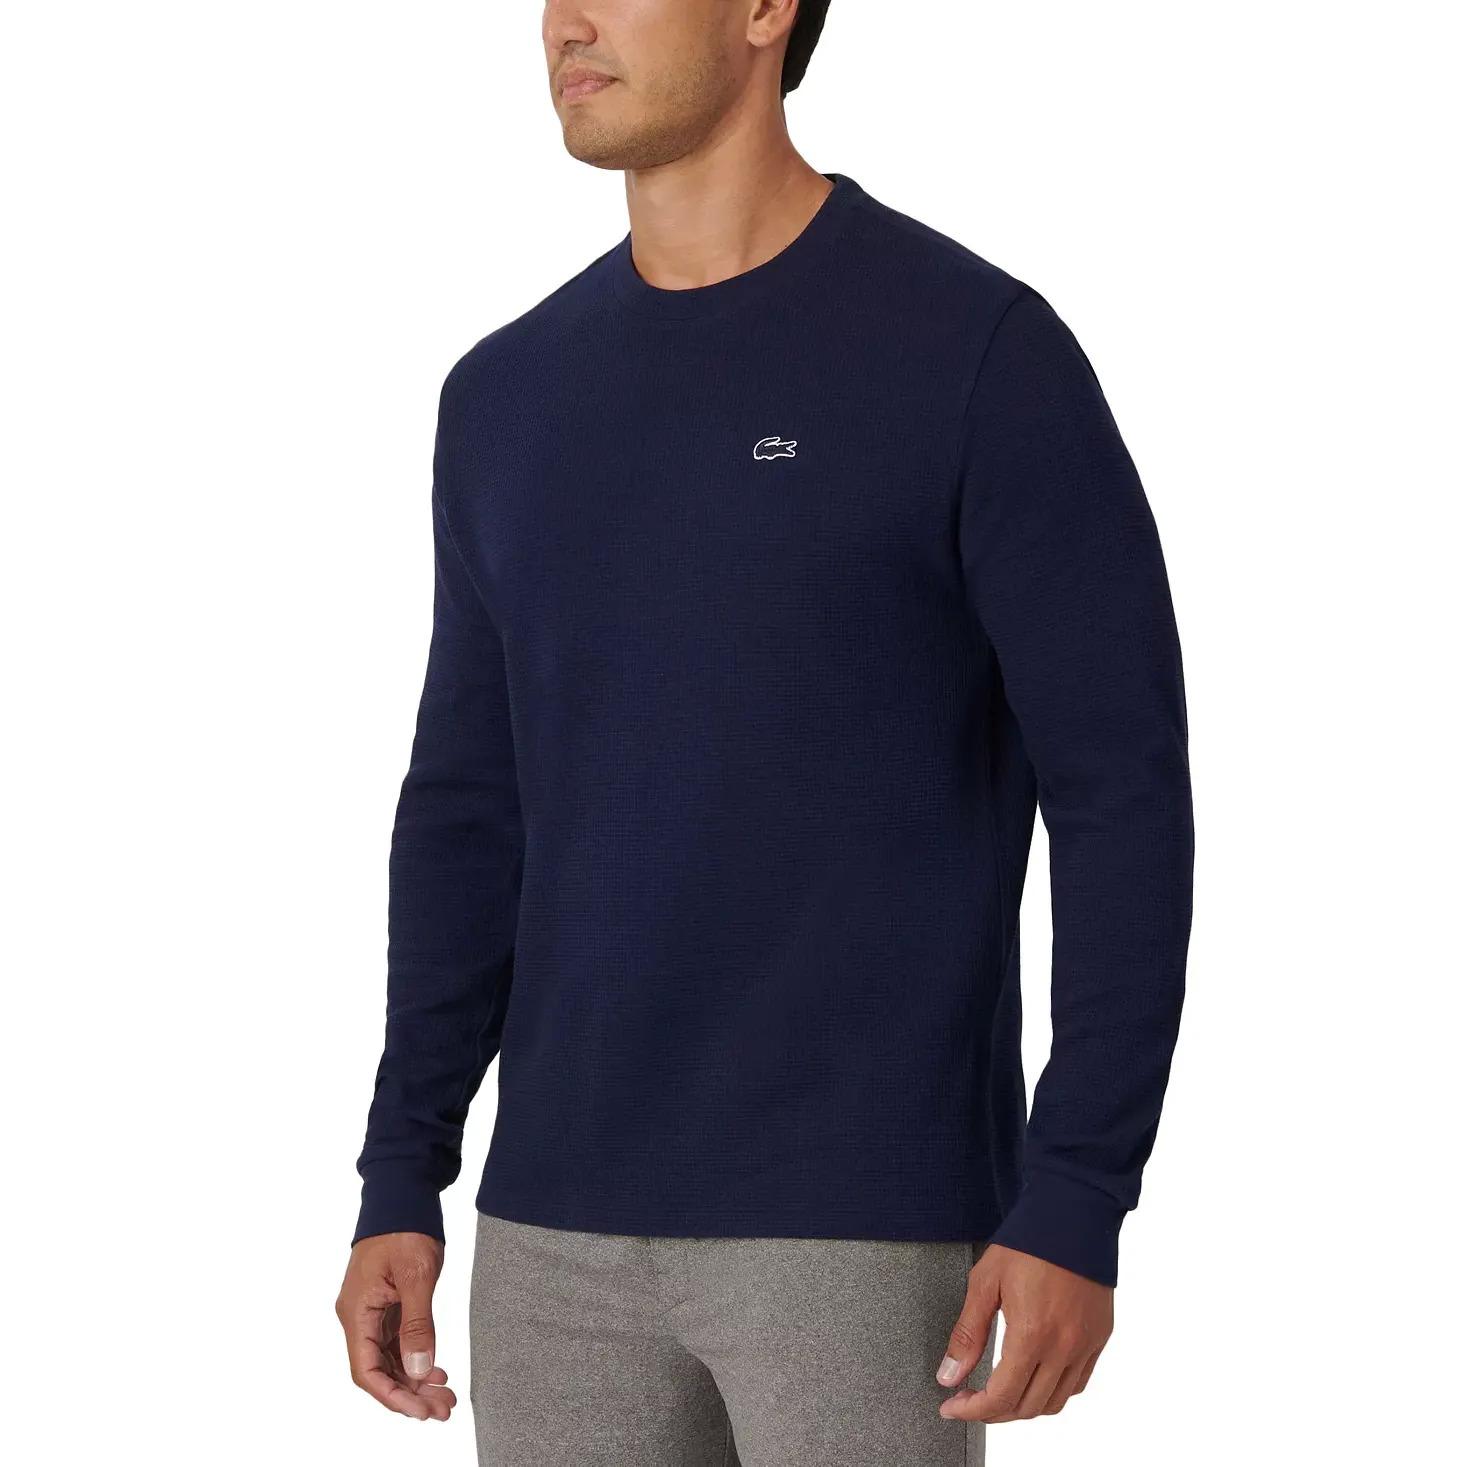 Lacoste Mens Waffle-Knit Thermal Long-Sleeve Sleep Tee for $29.99 Shipped